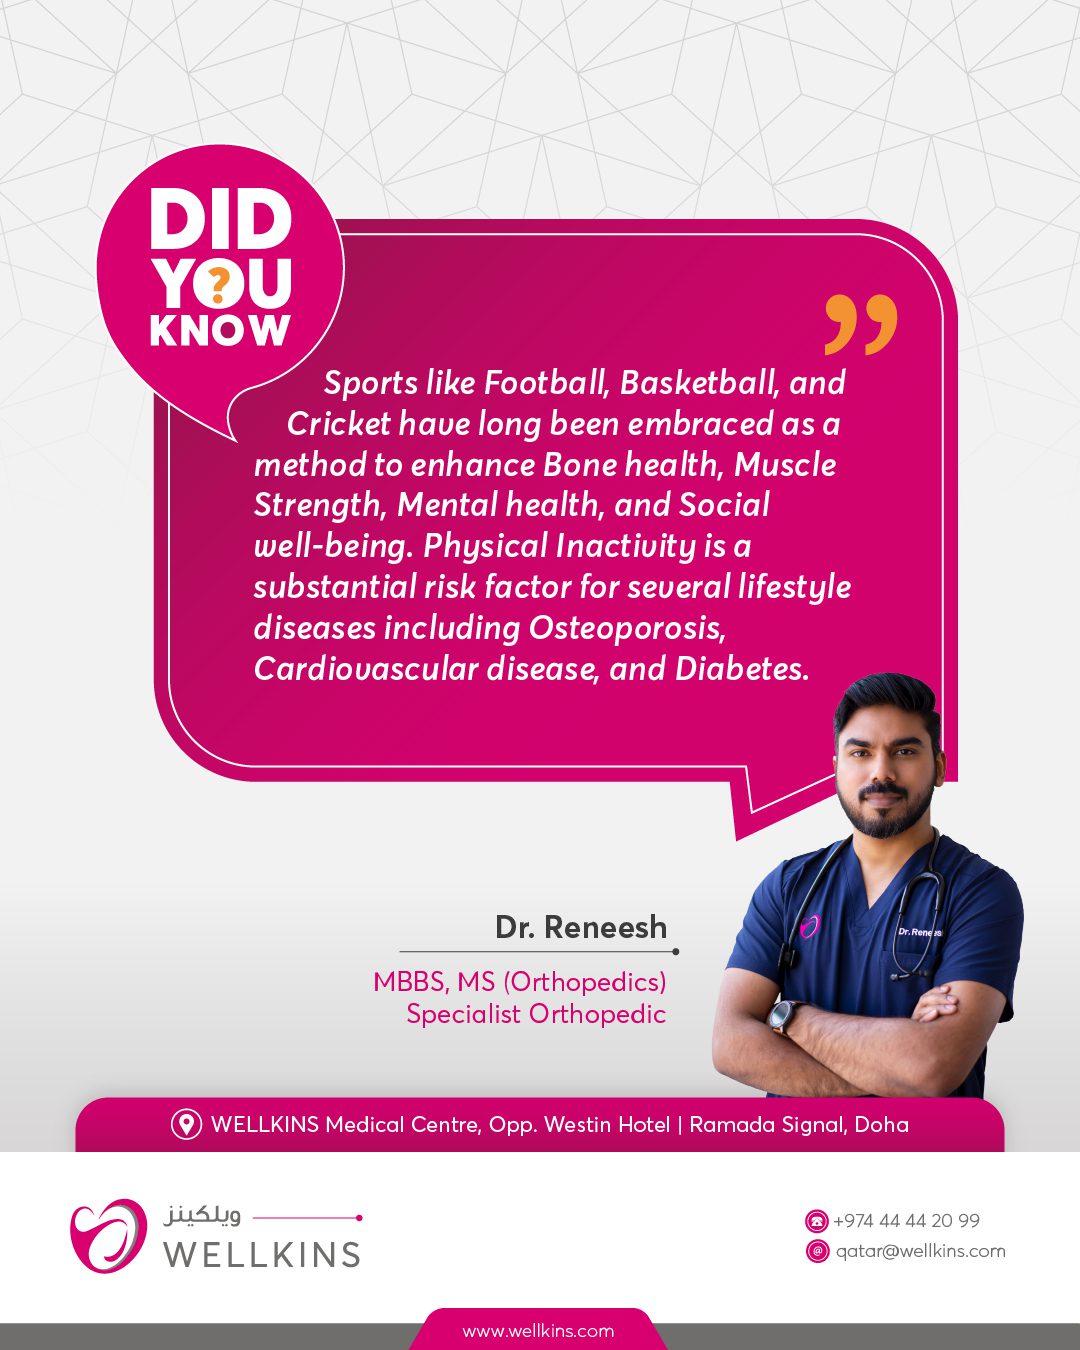 #DidYouKnow''Sports like Football, Basketball, and Cricket have long been embraced as a method to enhance Bone health, Muscle Strength, Mental health, and Social well-being. Physical Inactivity is a substantial risk factor for several lifestyle diseases including Osteoporosis, Cardiovascular disease, and Diabetes.''- Says Dr.Reneesh (Specialist Orthopedic - WELLKINS Medical Centre)_______________________________
To learn more about #WELLKINSQATAR and our services, kindly visit our website www.wellkins.com
Helpline: 4444 2099
_______________________________
#Wellkinsqatar #wellkins #medicalcentre #qatar2022